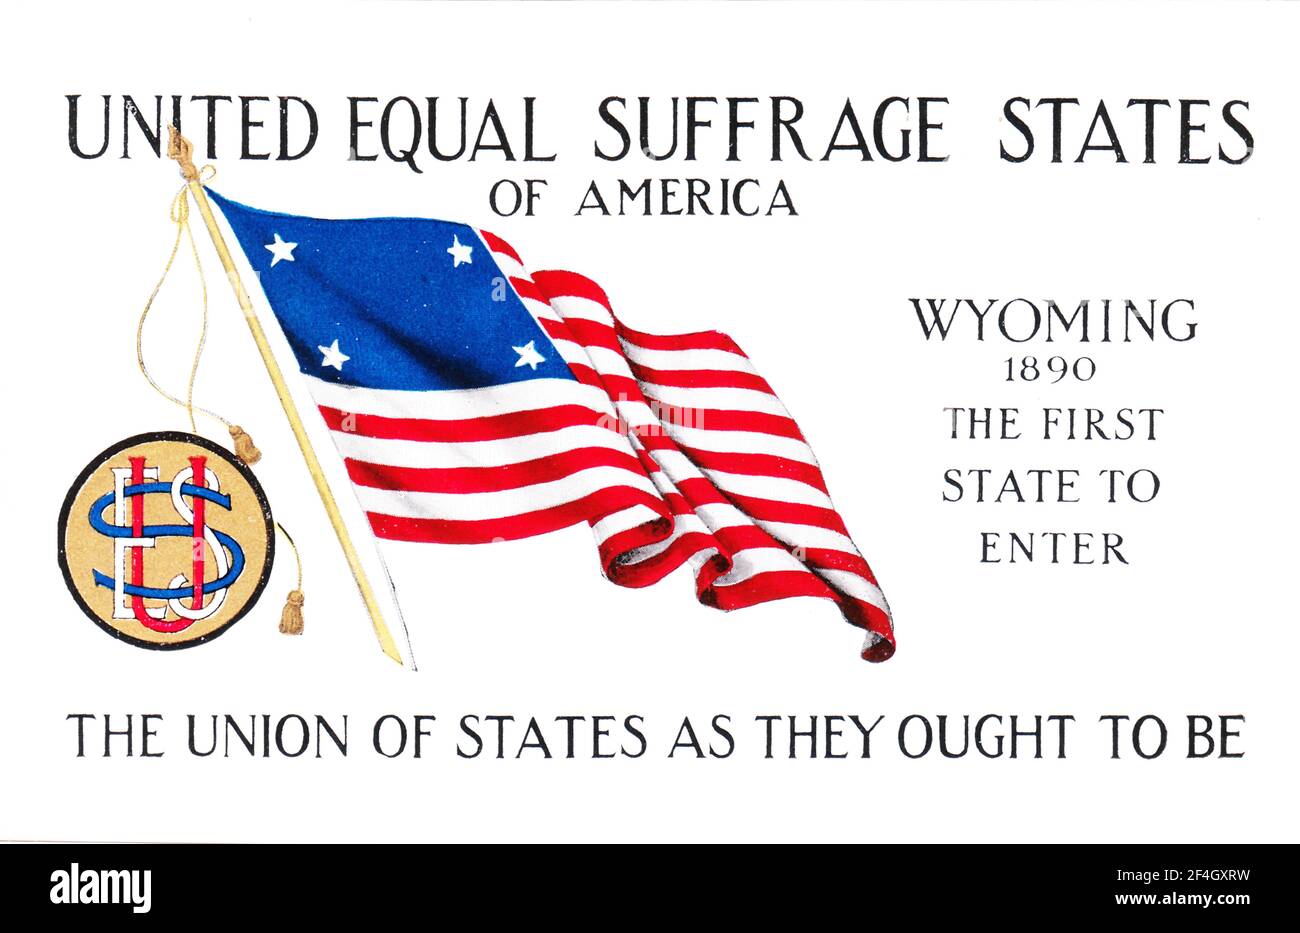 Suffrage postcard, with a four-starred American flag, celebrating Wyoming as the first of four states to grant women full voting rights, endorsed by the National Woman's Suffrage Association, published by the Cargill Company, Grand Rapids, Michigan, 1910. Photography by Emilia van Beugen. () Stock Photo